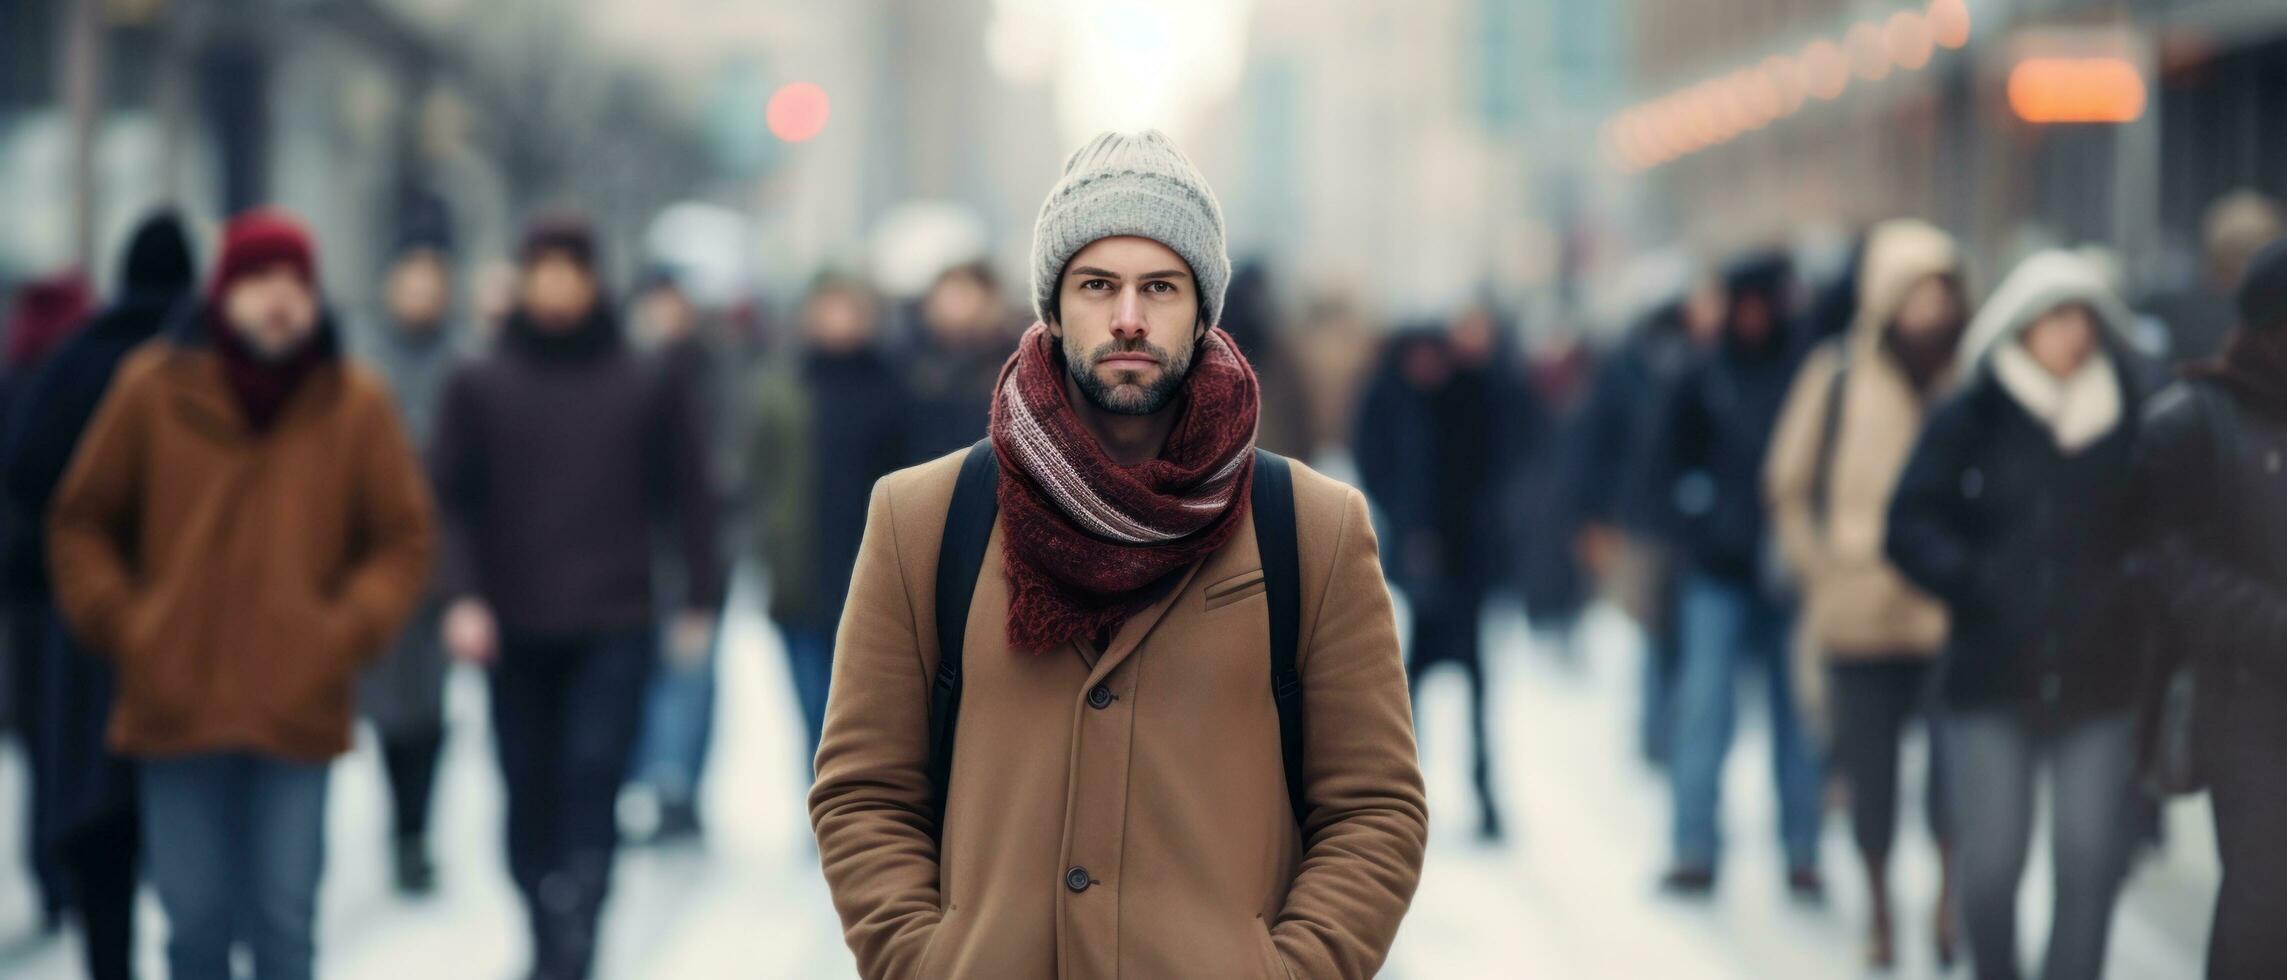 AI generated man walking down the street surrounded by people in winter attire photo